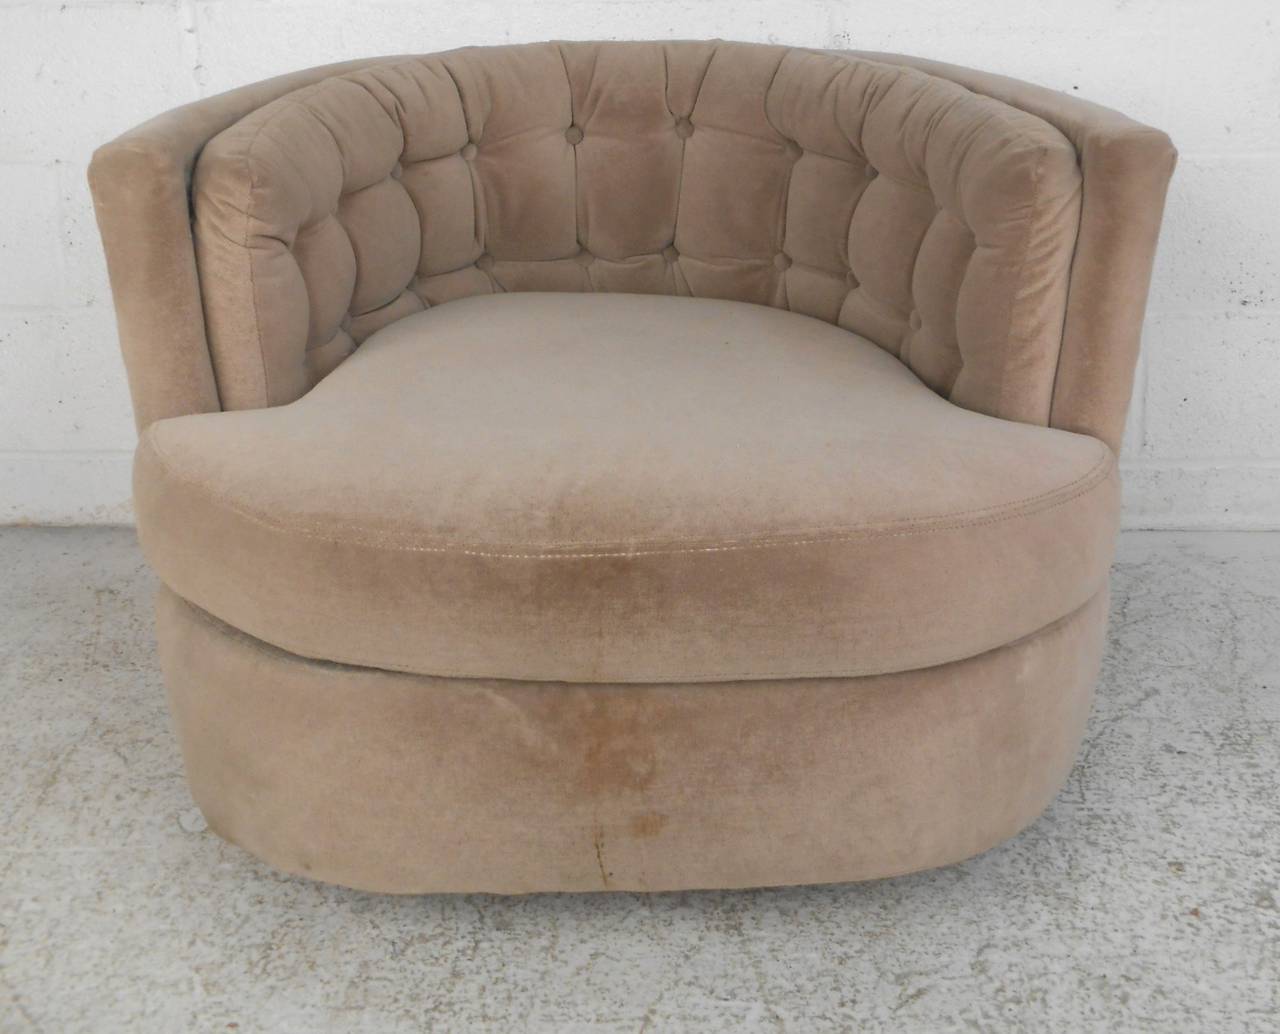 This Mid-Century lounge chair features comfortable tufted upholstery, unique Baughman style design, and versatile swivel movement to stylishly enhance any seating area. Perfect for home or business, please confirm item location (NY or NJ).